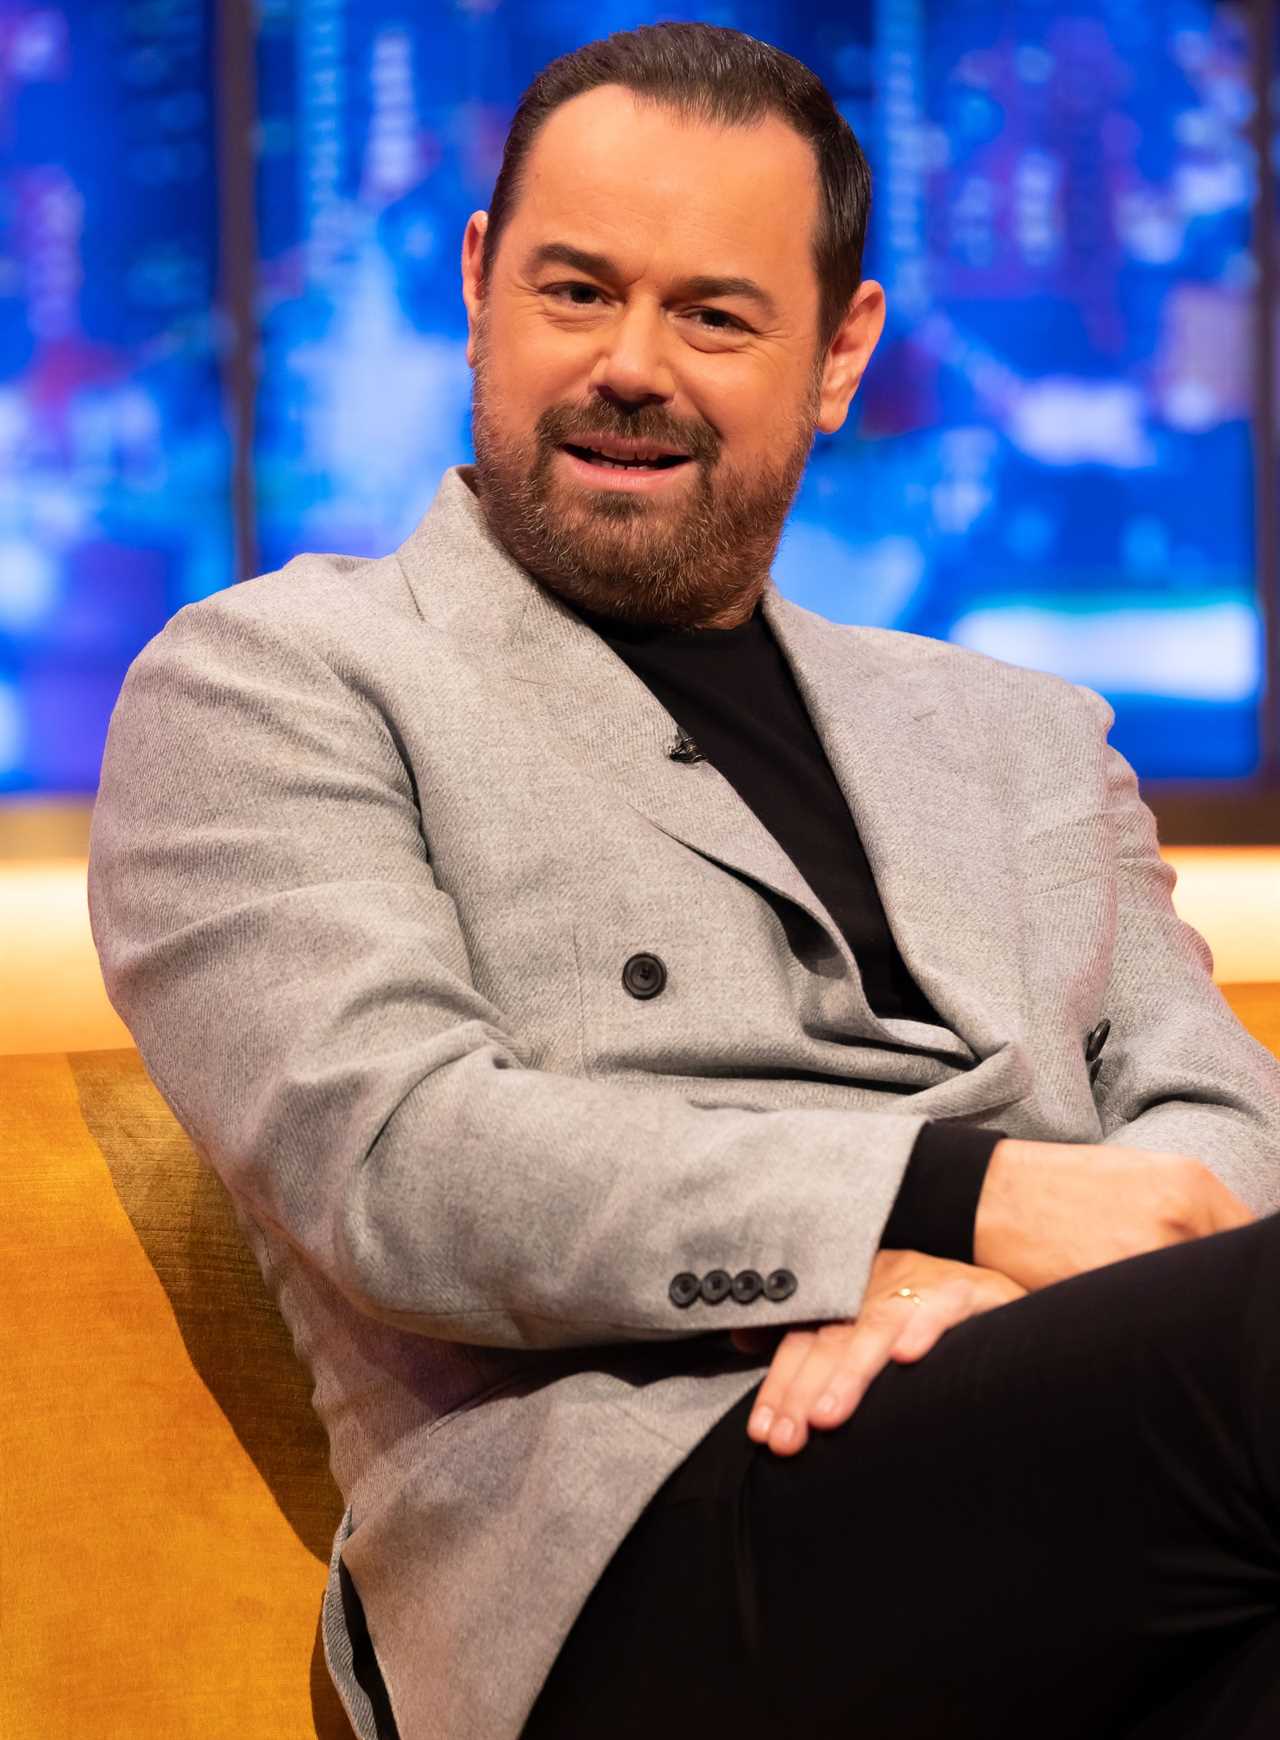 Danny Dyer set for raunchy sex scenes in new show – cheating on his wife with TV legend